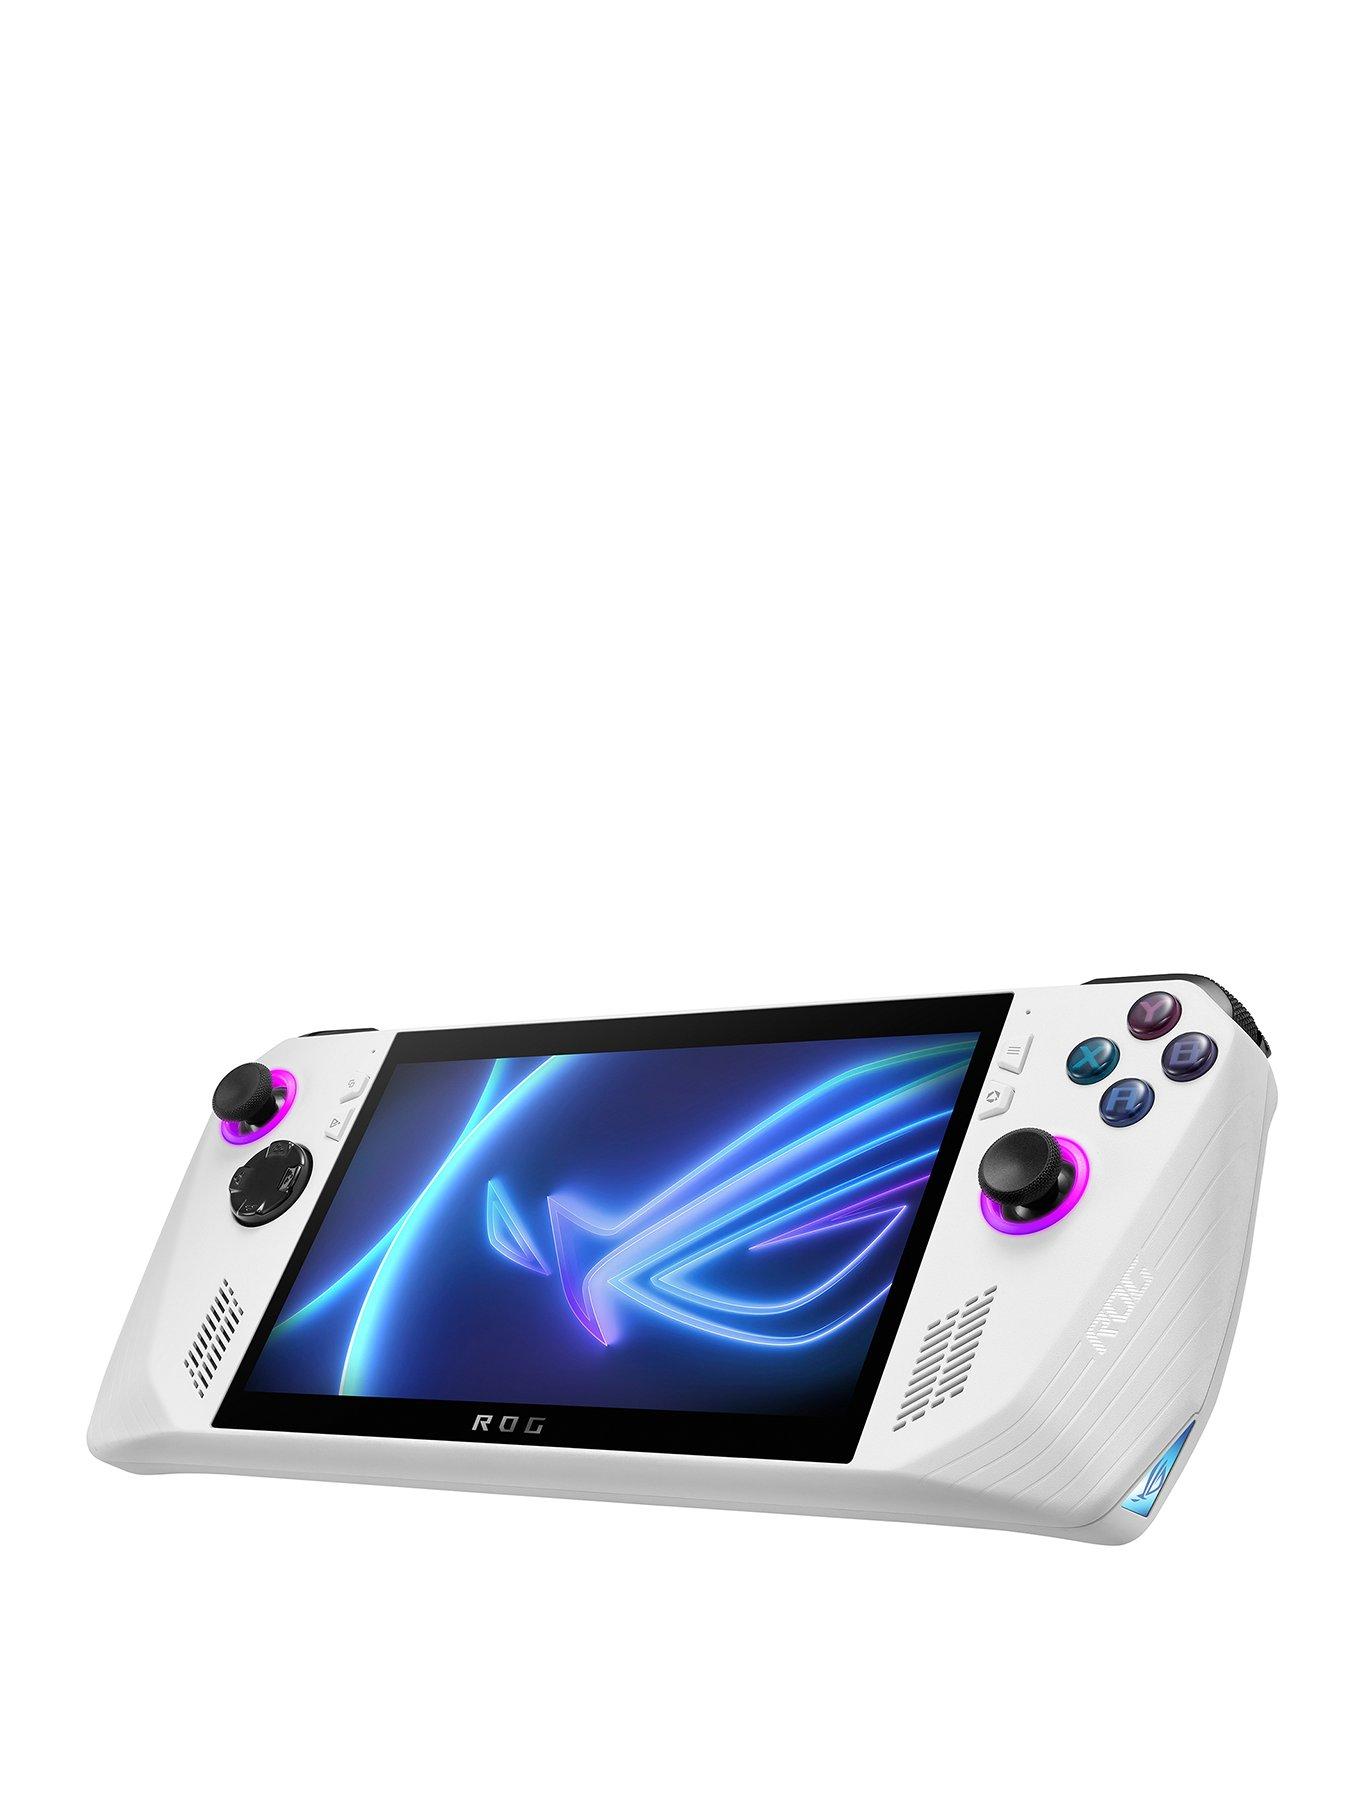 ASUS ROG Ally 7 120Hz Gaming Handheld - AMD Z1 Extreme Processor - 512GB -  White - PRE ORDER!